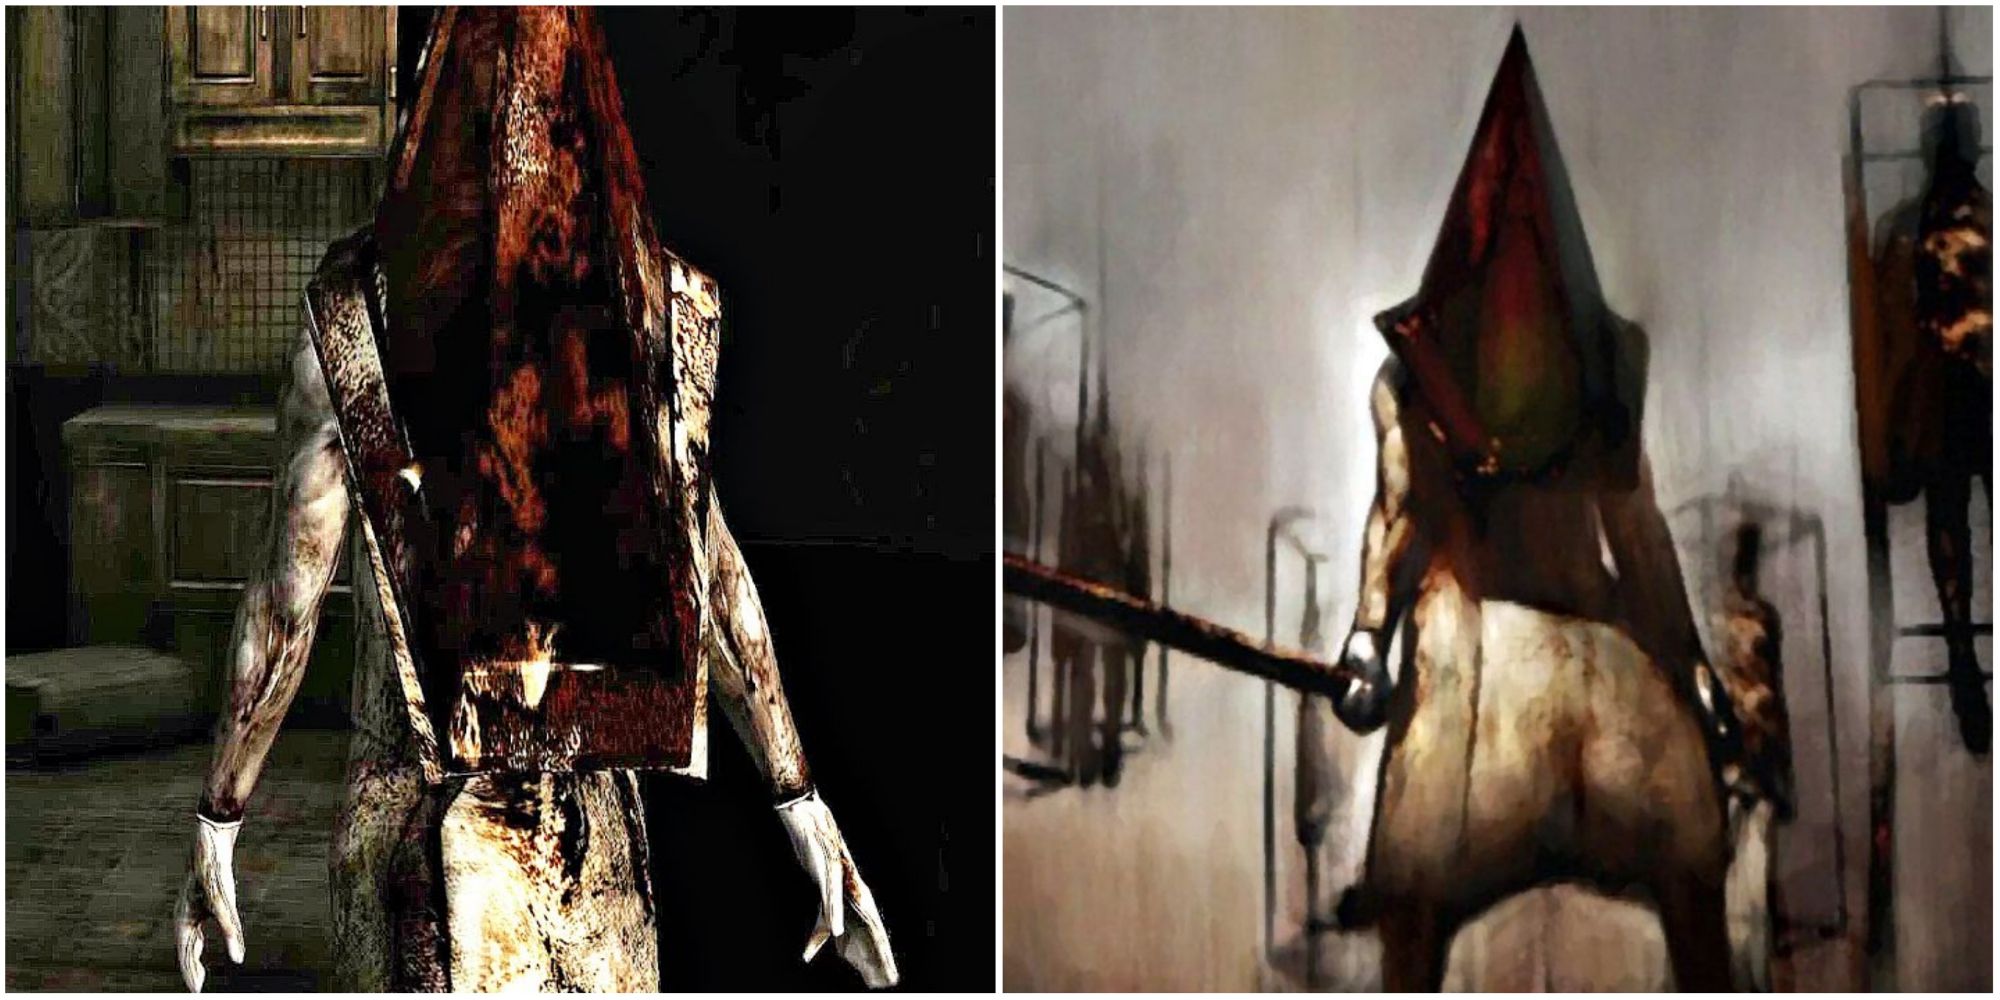 Two images size by side, showing Pyramid Head